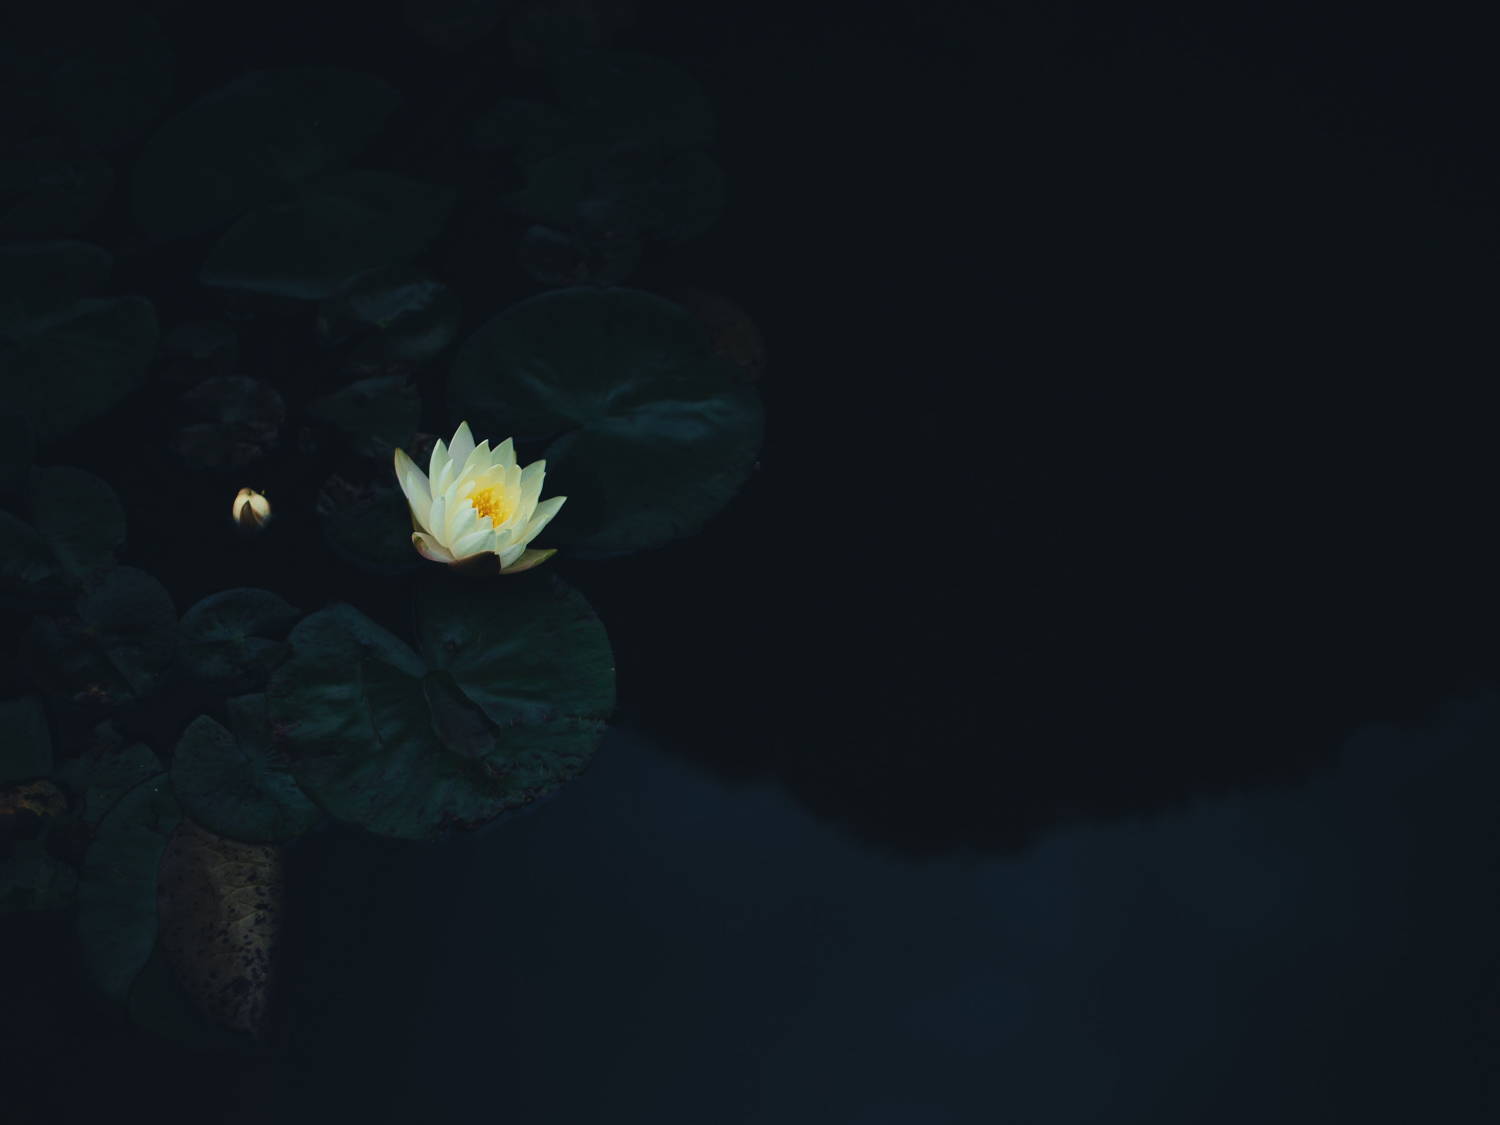 Lily with dark background